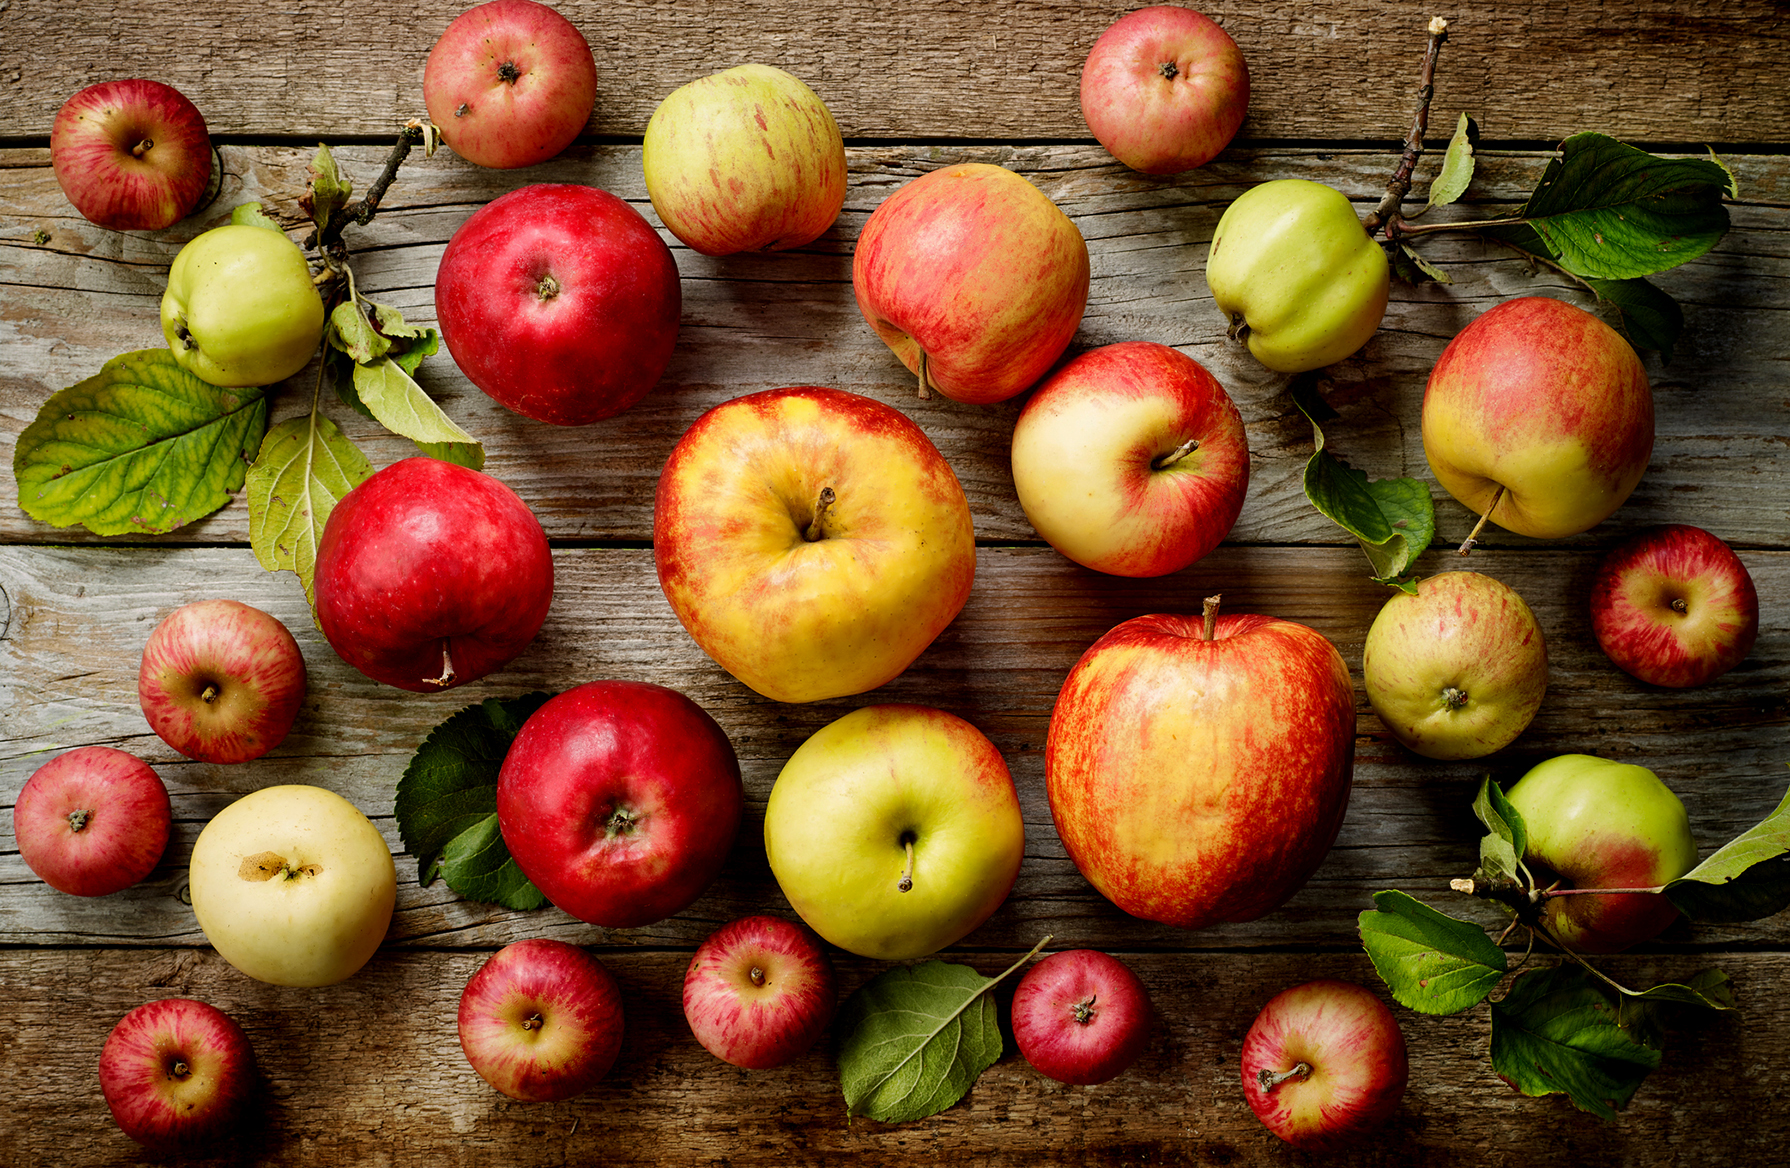 A Handy Guide To The Most Popular Apple Varieties And Their Uses